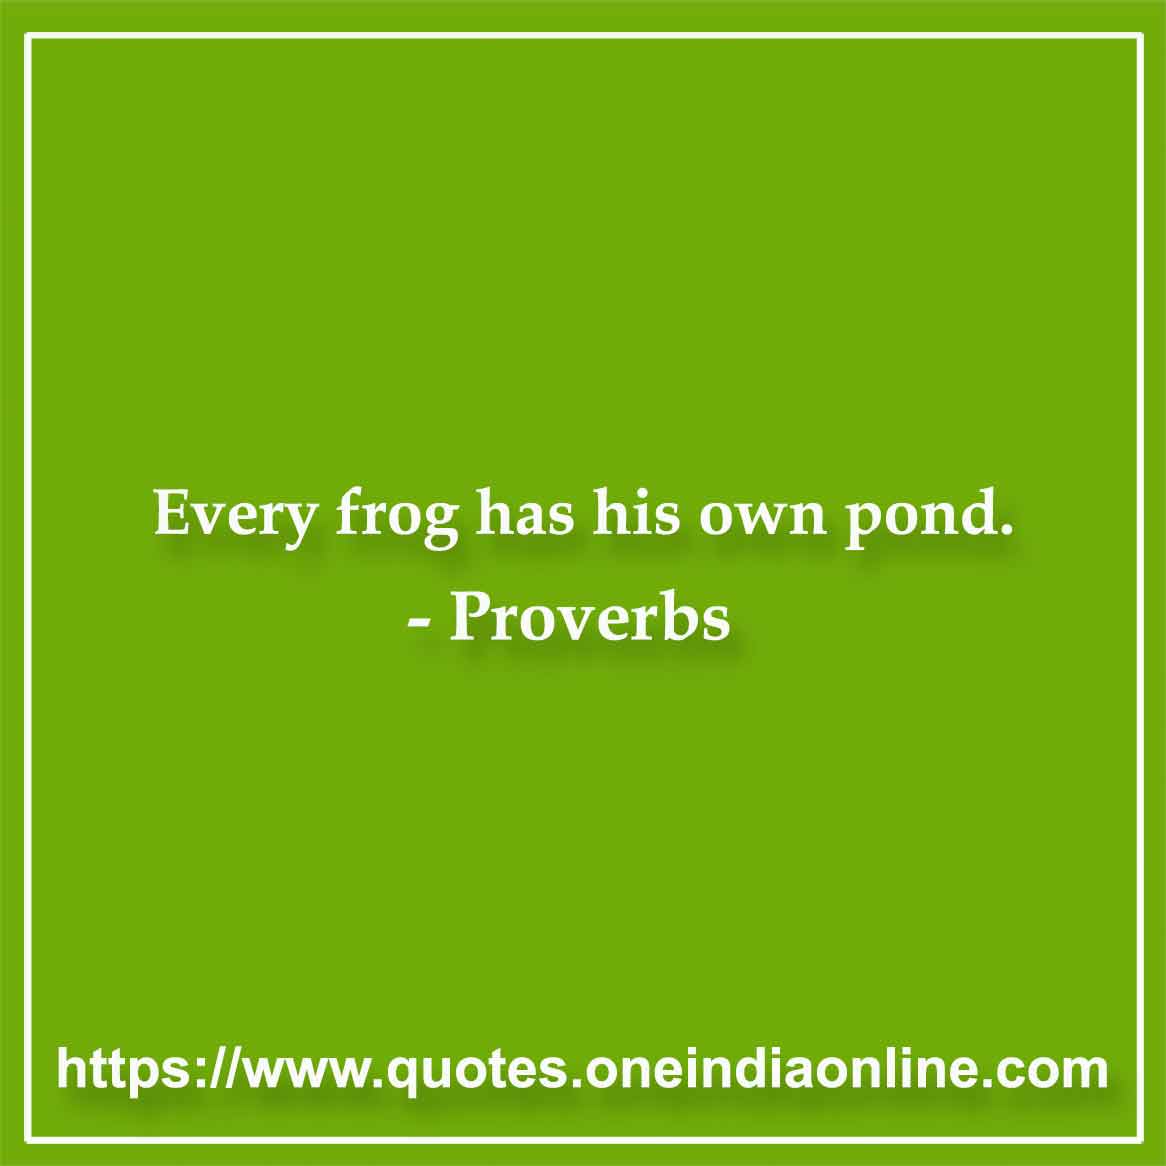 Every frog has his own pond.

Bulgarian